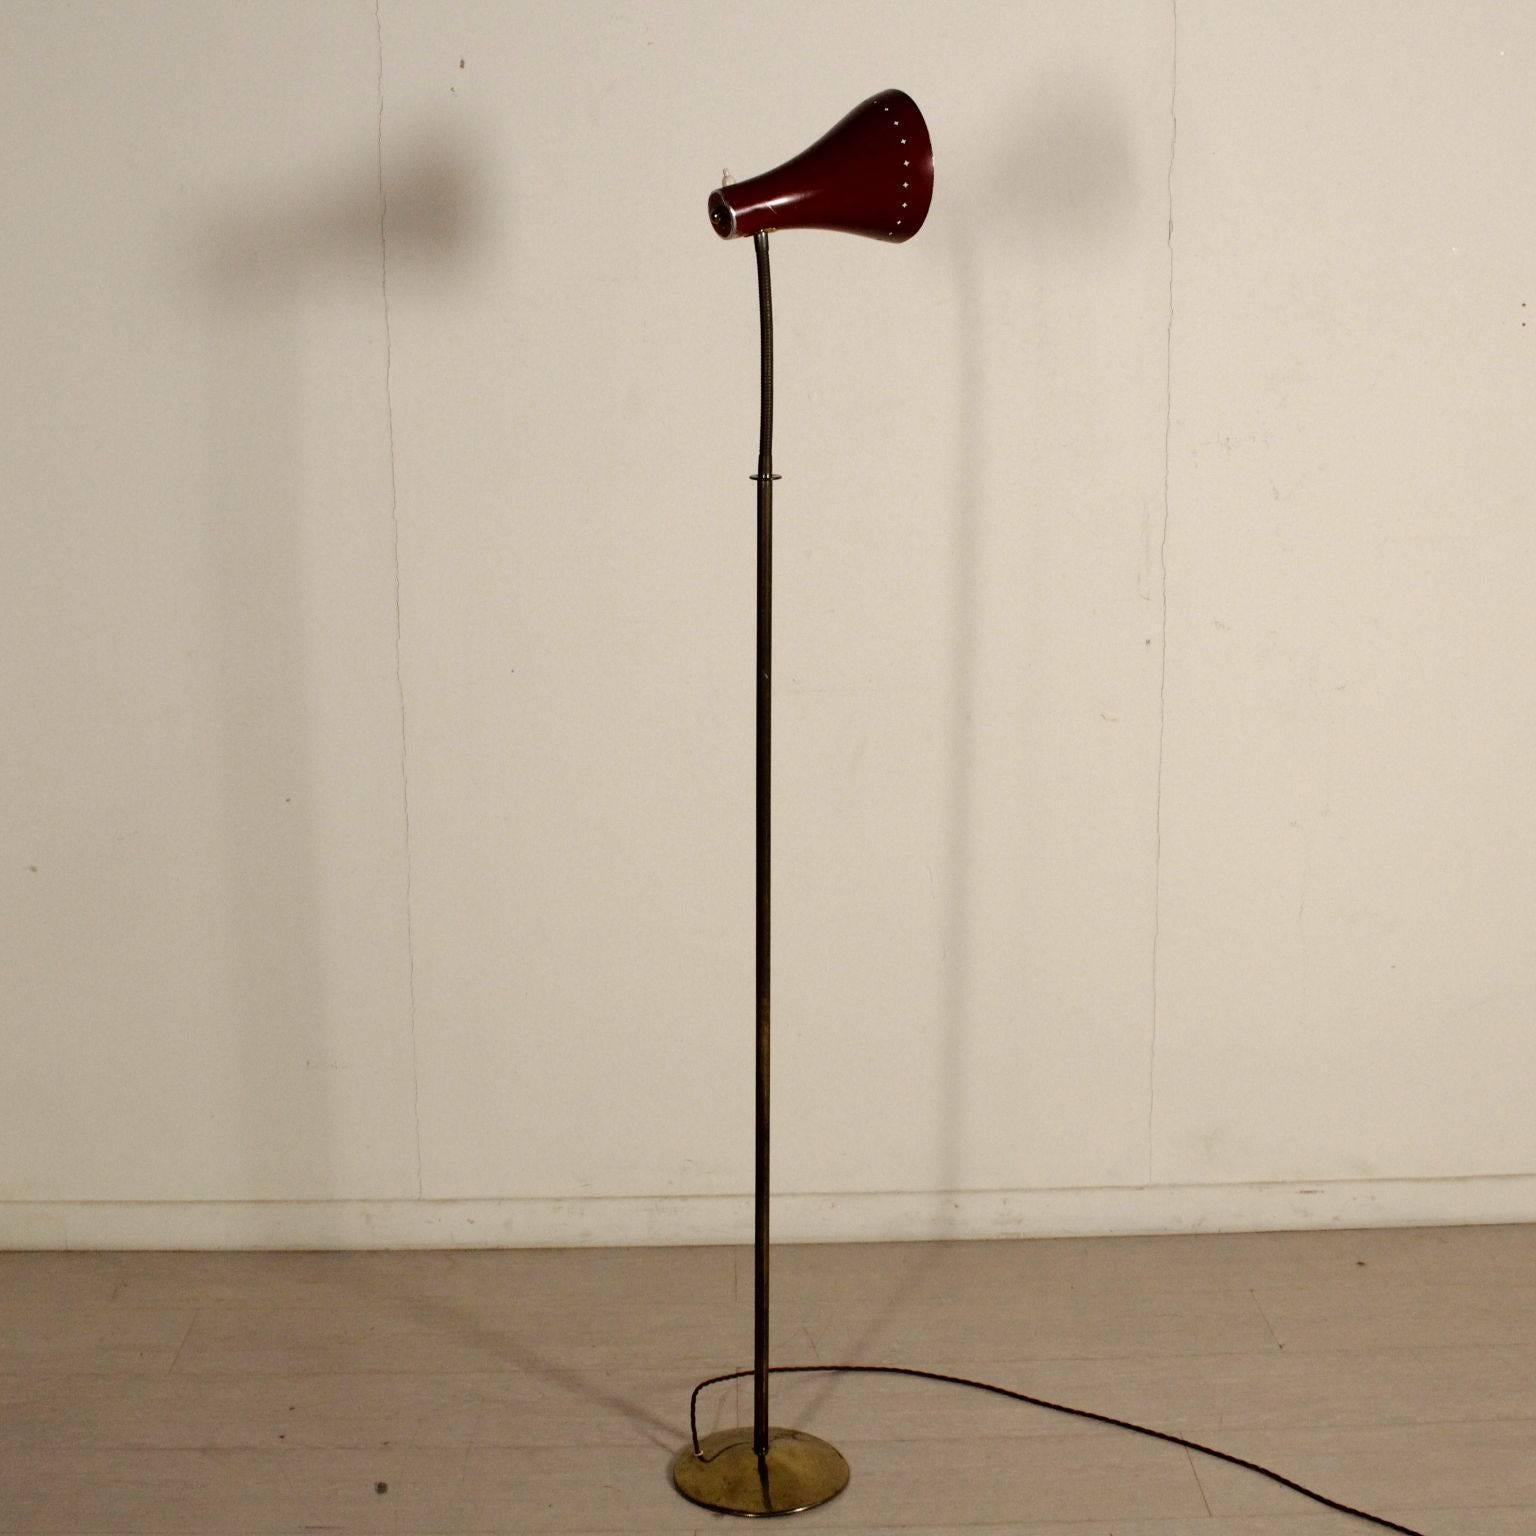 Mid-Century Modern Floor Lamp with Flexible Stem Brass Lacquered Aluminium Vintage, Italy, 1950s